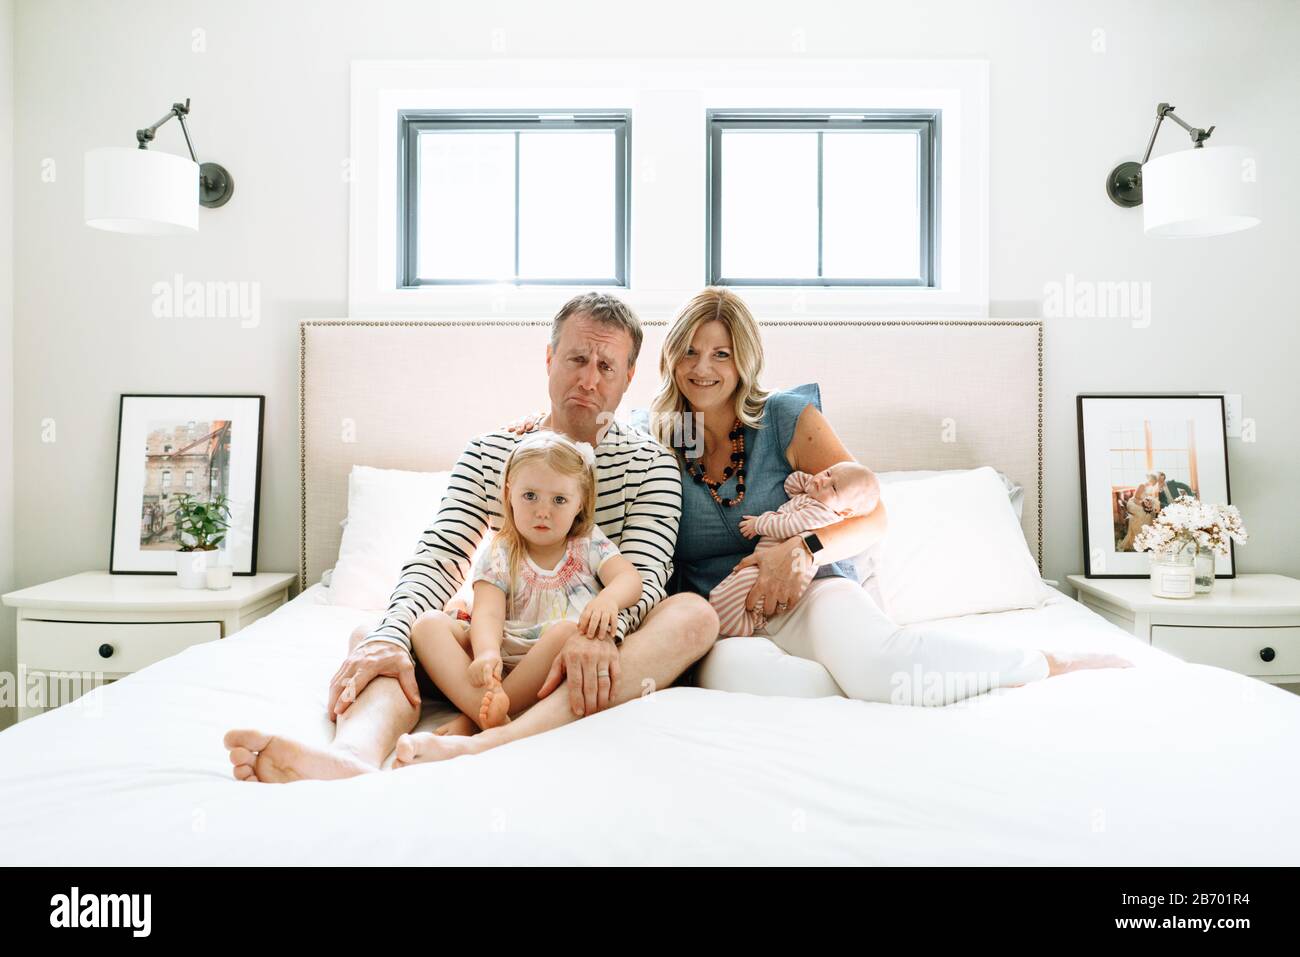 Portrait of a family sitting together on a bed making silly faces Stock Photo